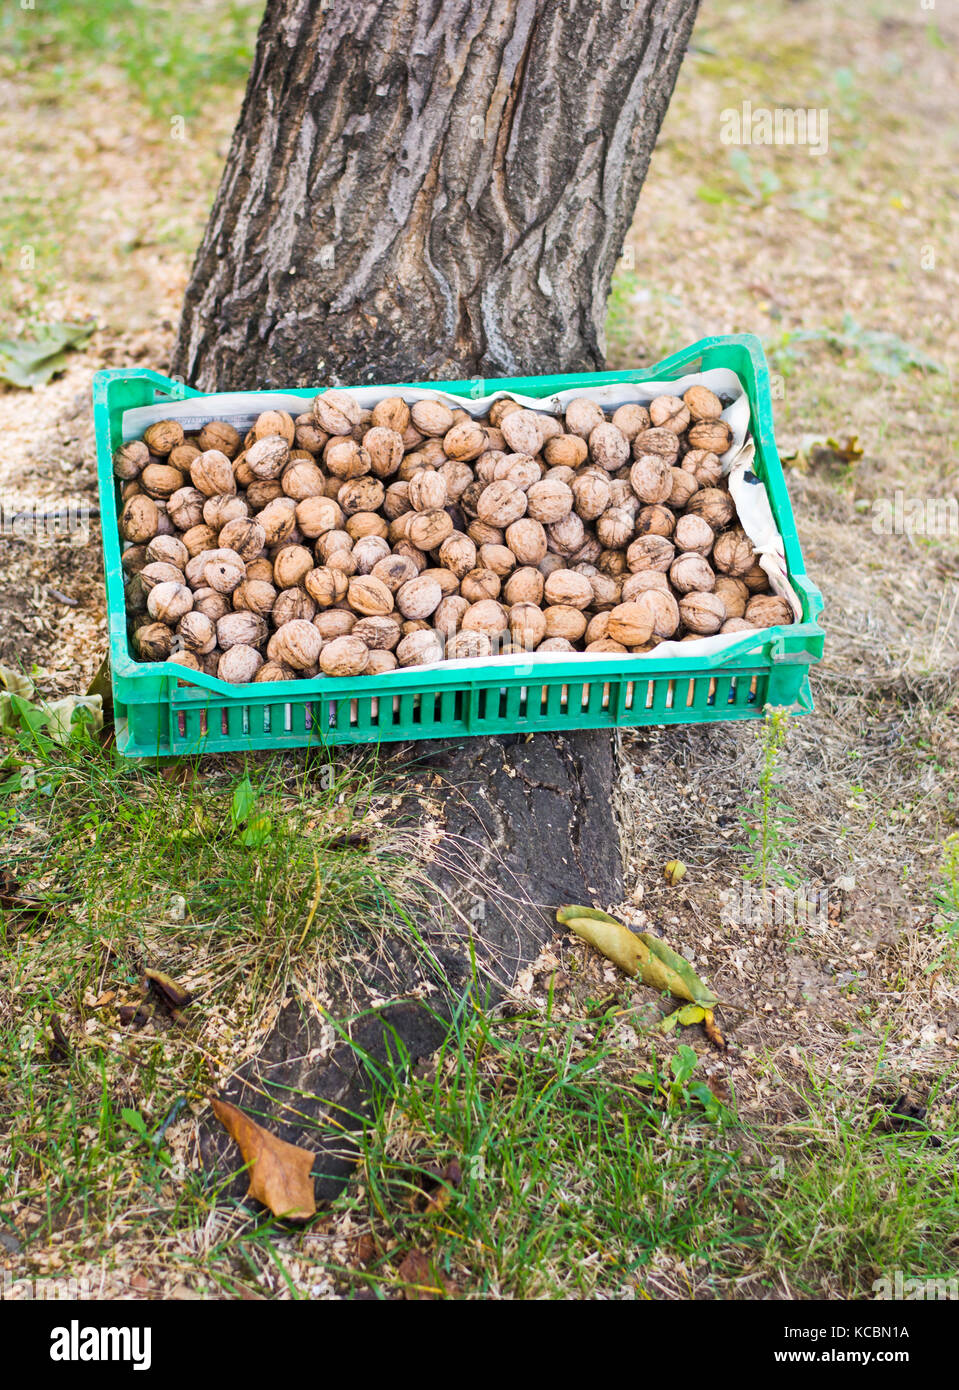 Box full with fresh picked walnuts by the tree Stock Photo